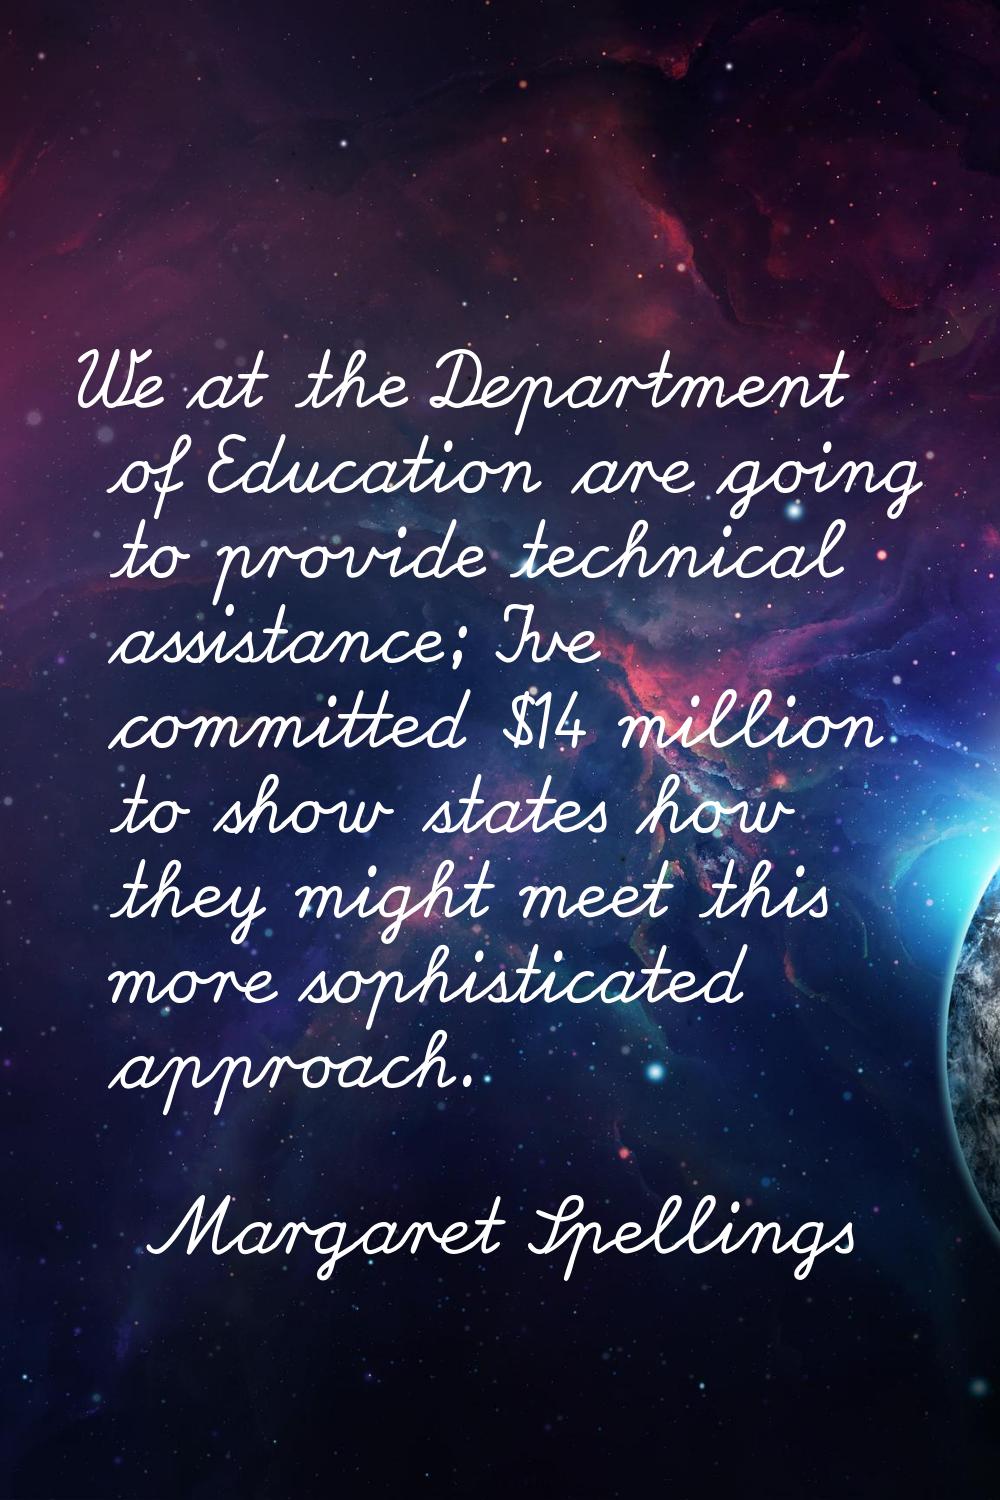 We at the Department of Education are going to provide technical assistance; I've committed $14 mil